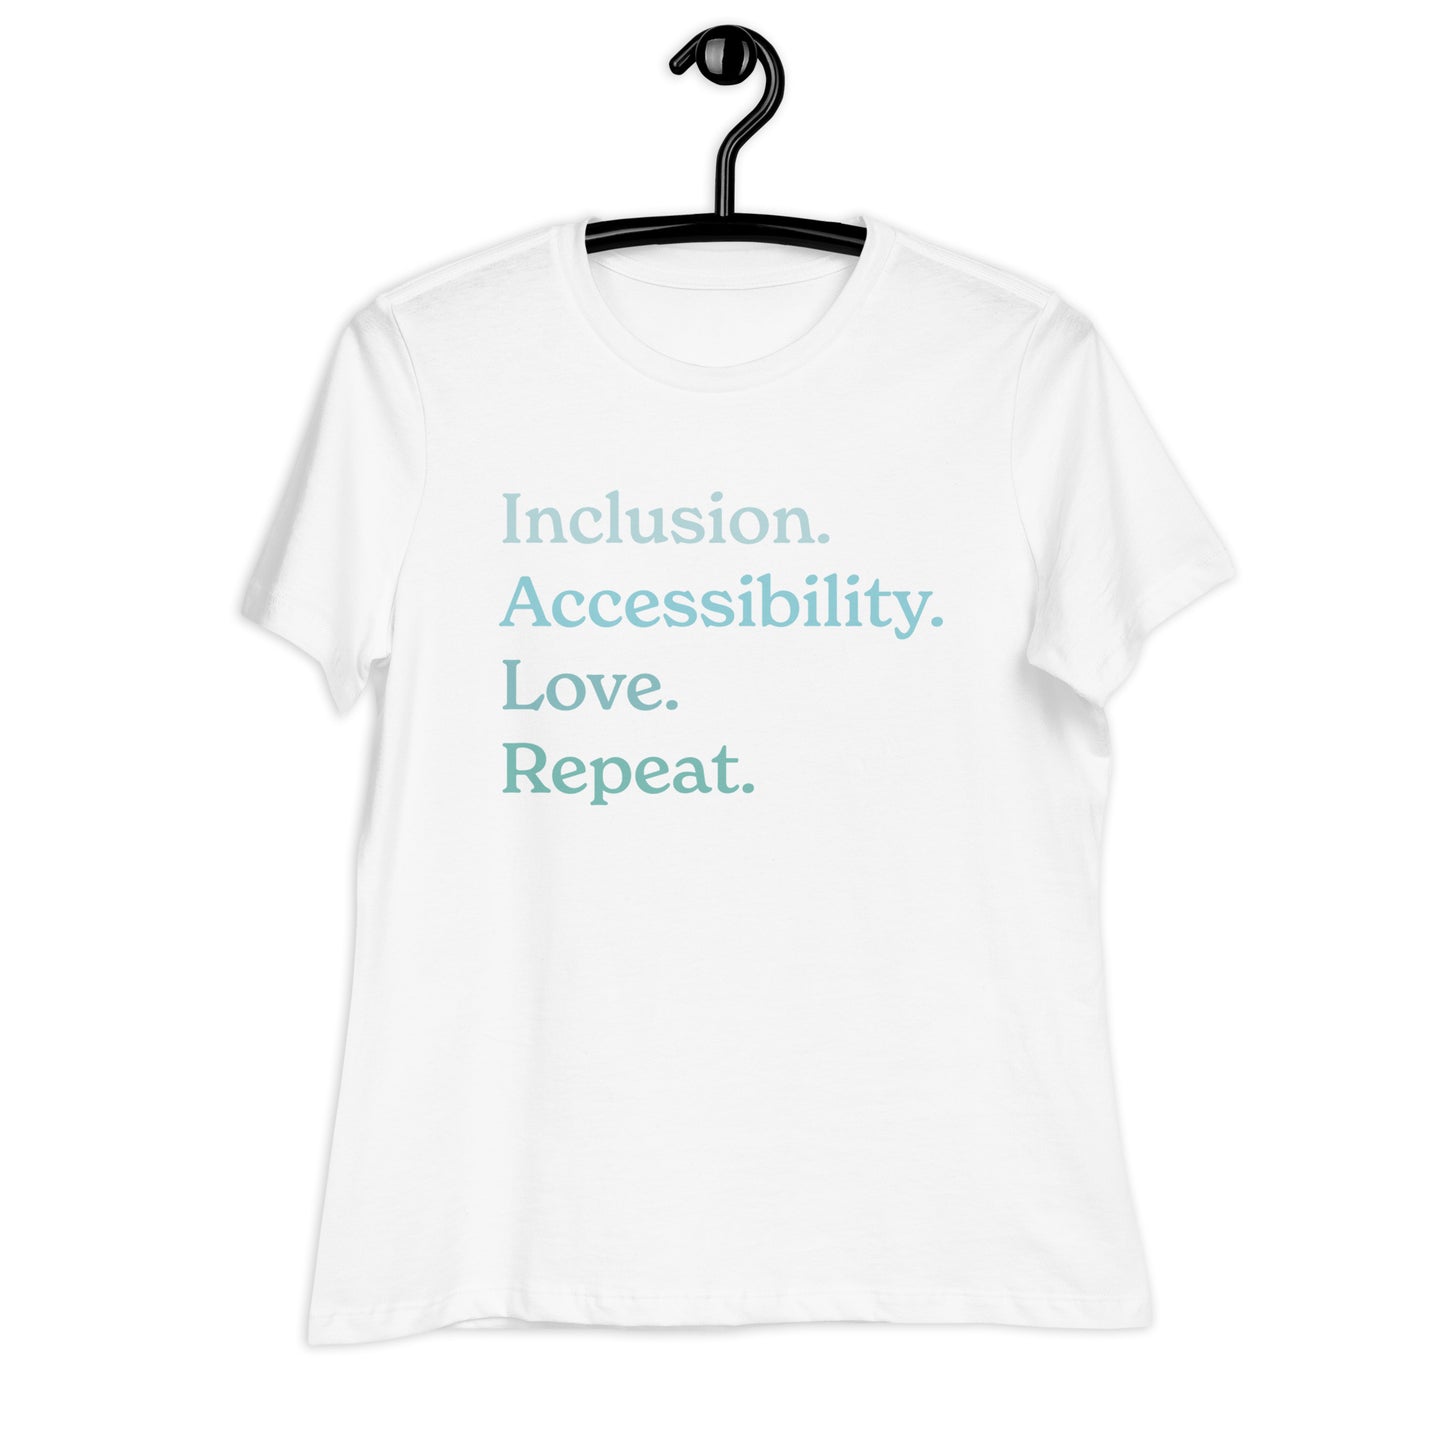 Inclusion. Accessibility. Love. Repeat. — Women's Relaxed Tee